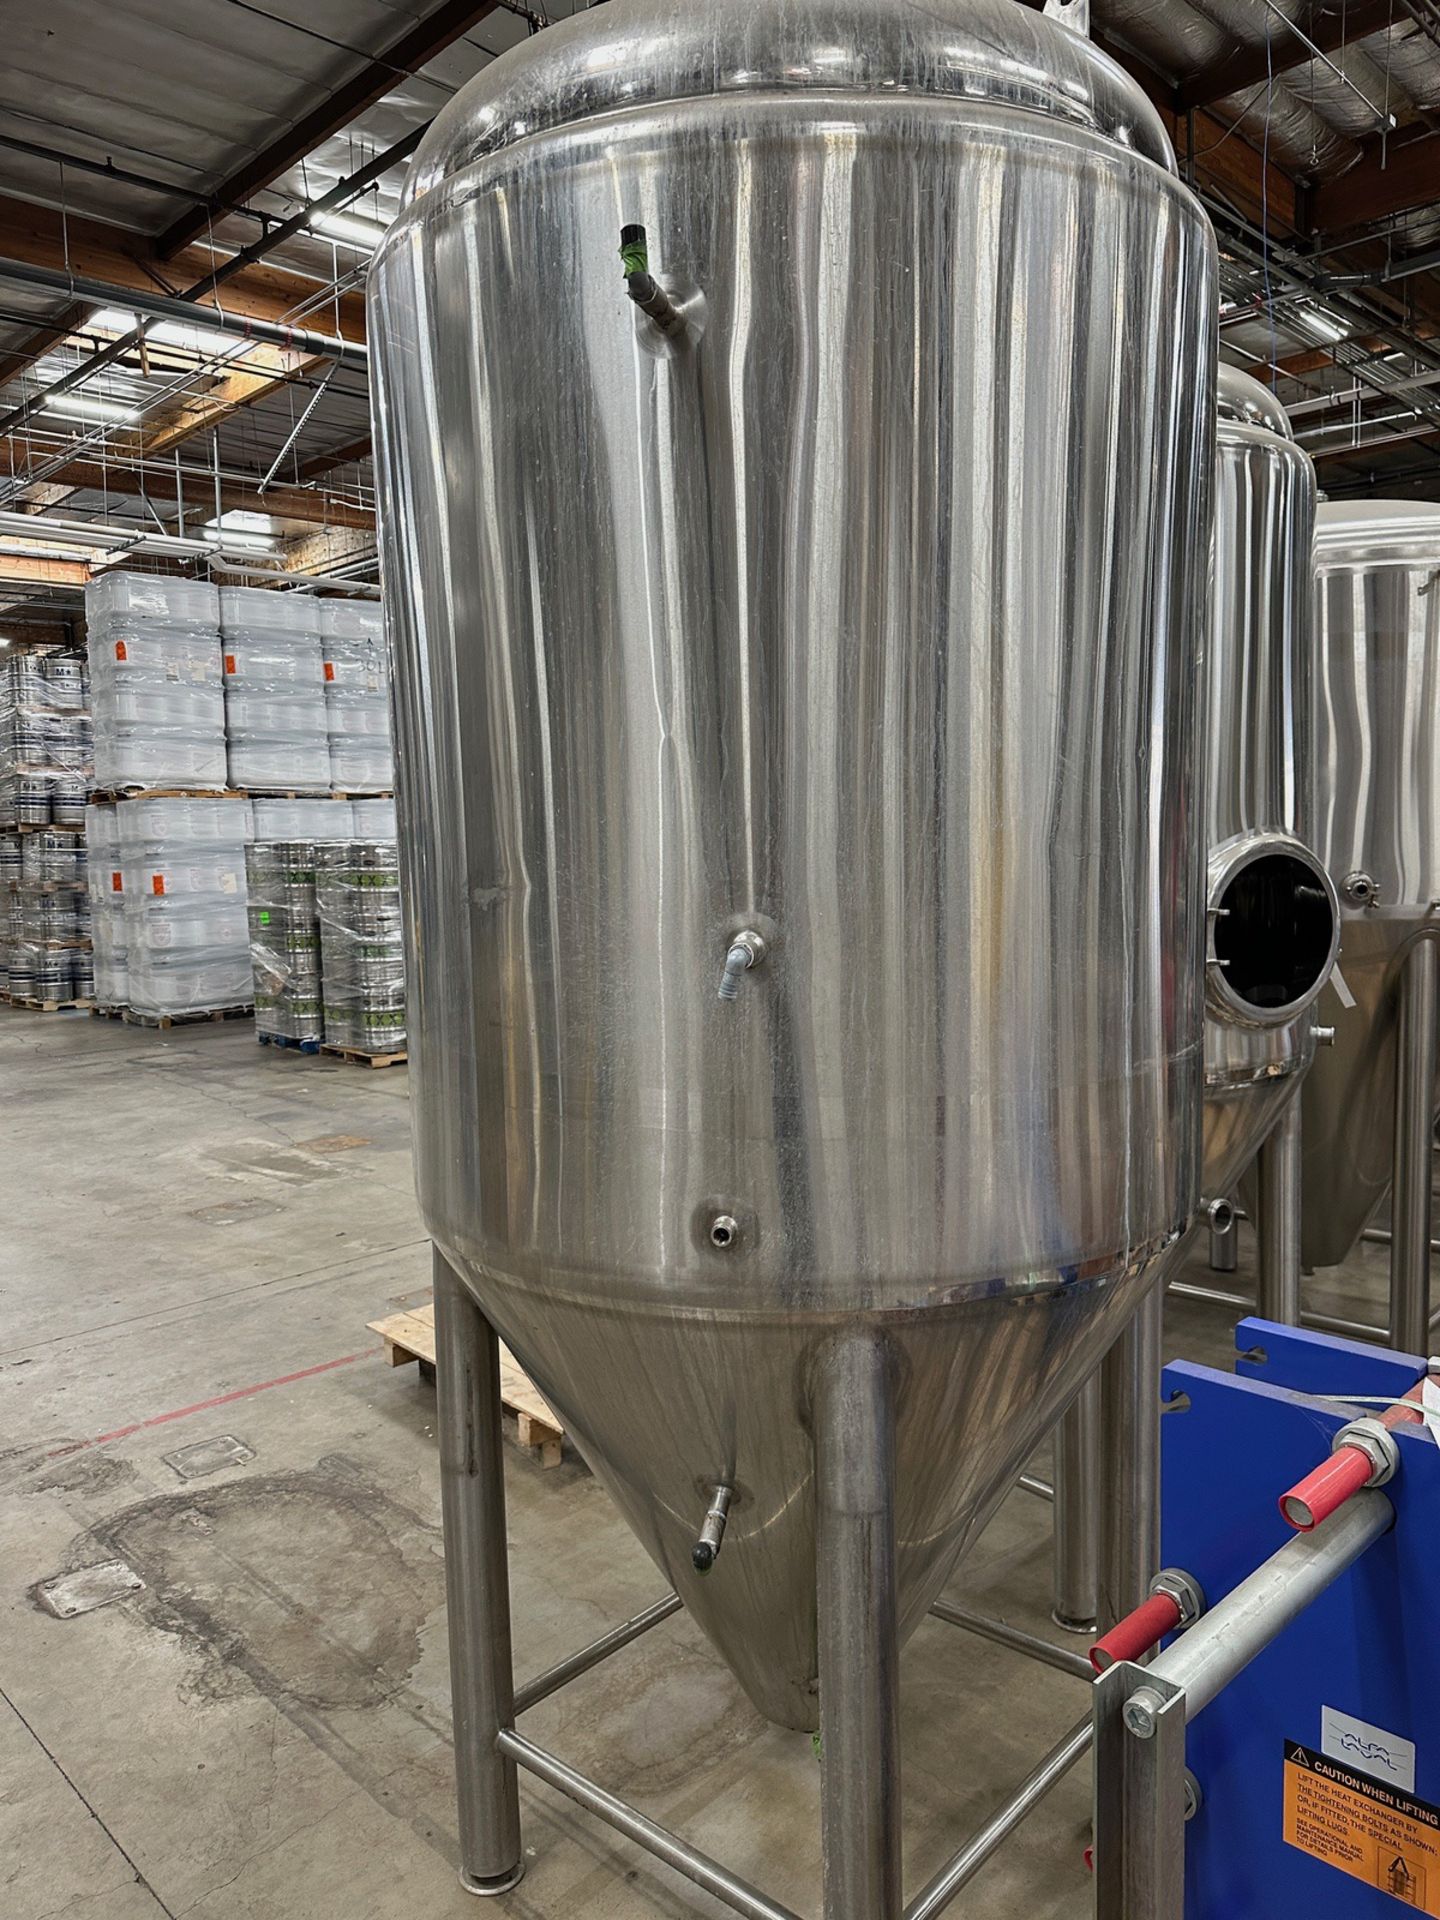 15 BBL Stainless Steel Fermentation Tank, Cone Bottom, Glycol Jacketed, No Fittings | Rig Fee $750 - Image 2 of 2